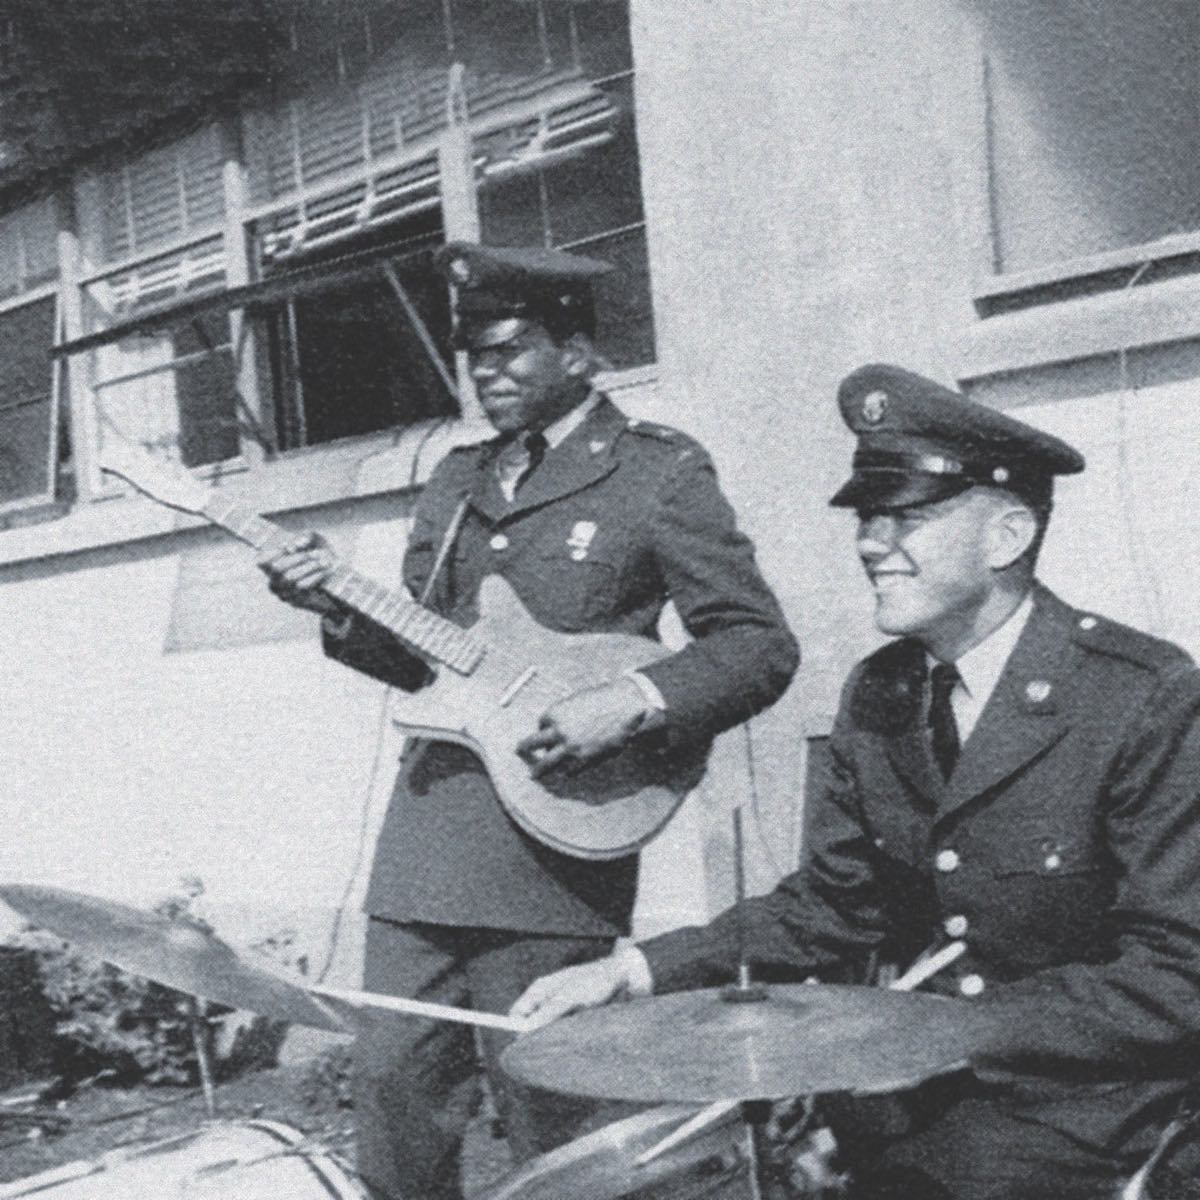 Jimi Hendrix performing in the US Army